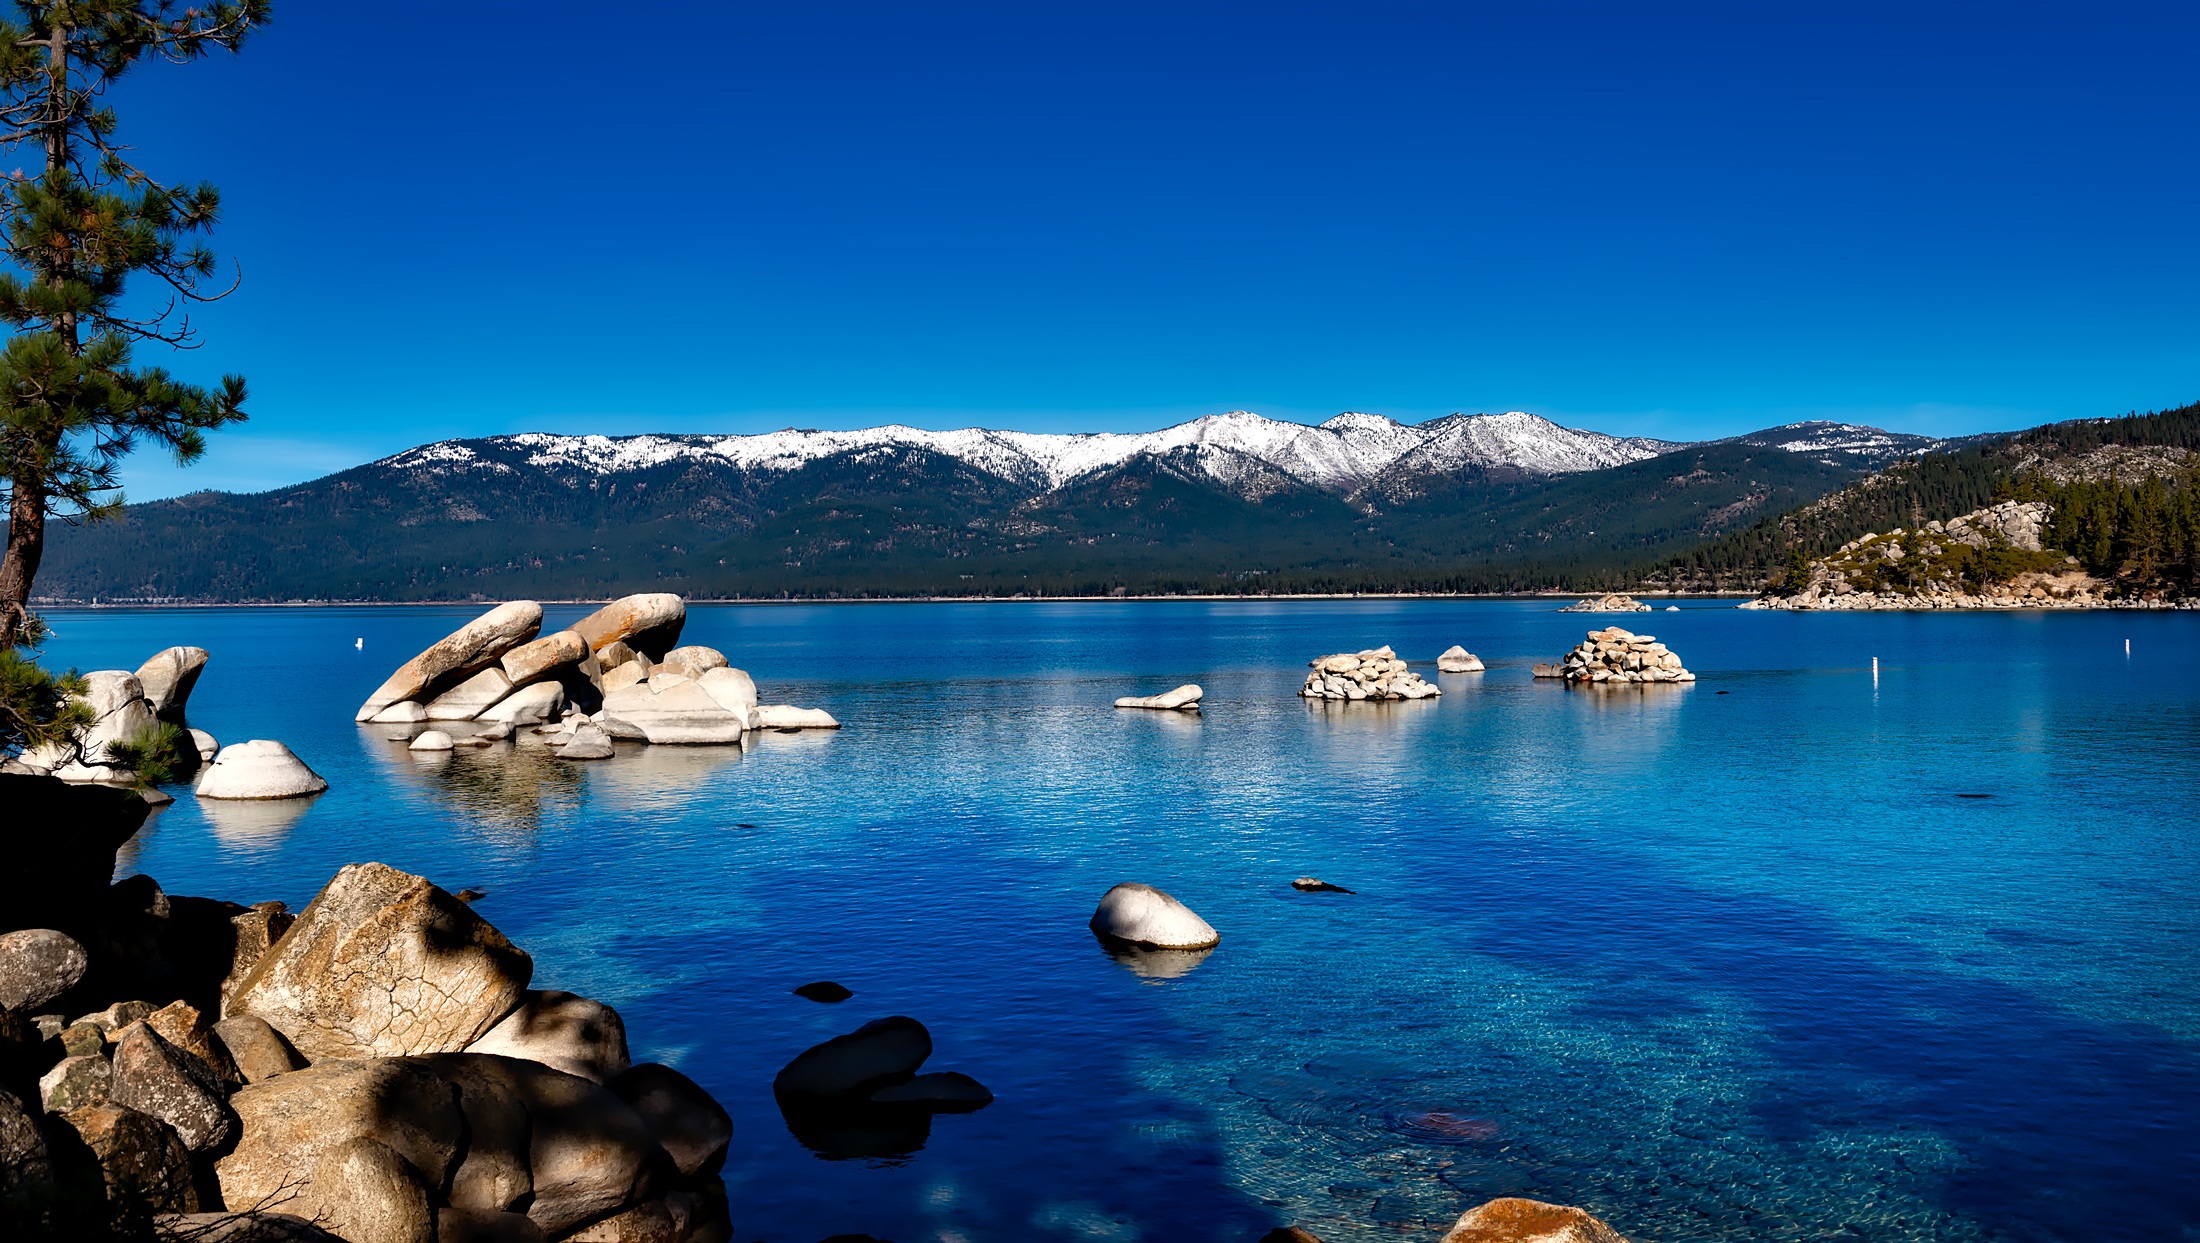 Lake Tahoe's clear blue waters, rocks in the foreground and snow on the distant mountain peaks